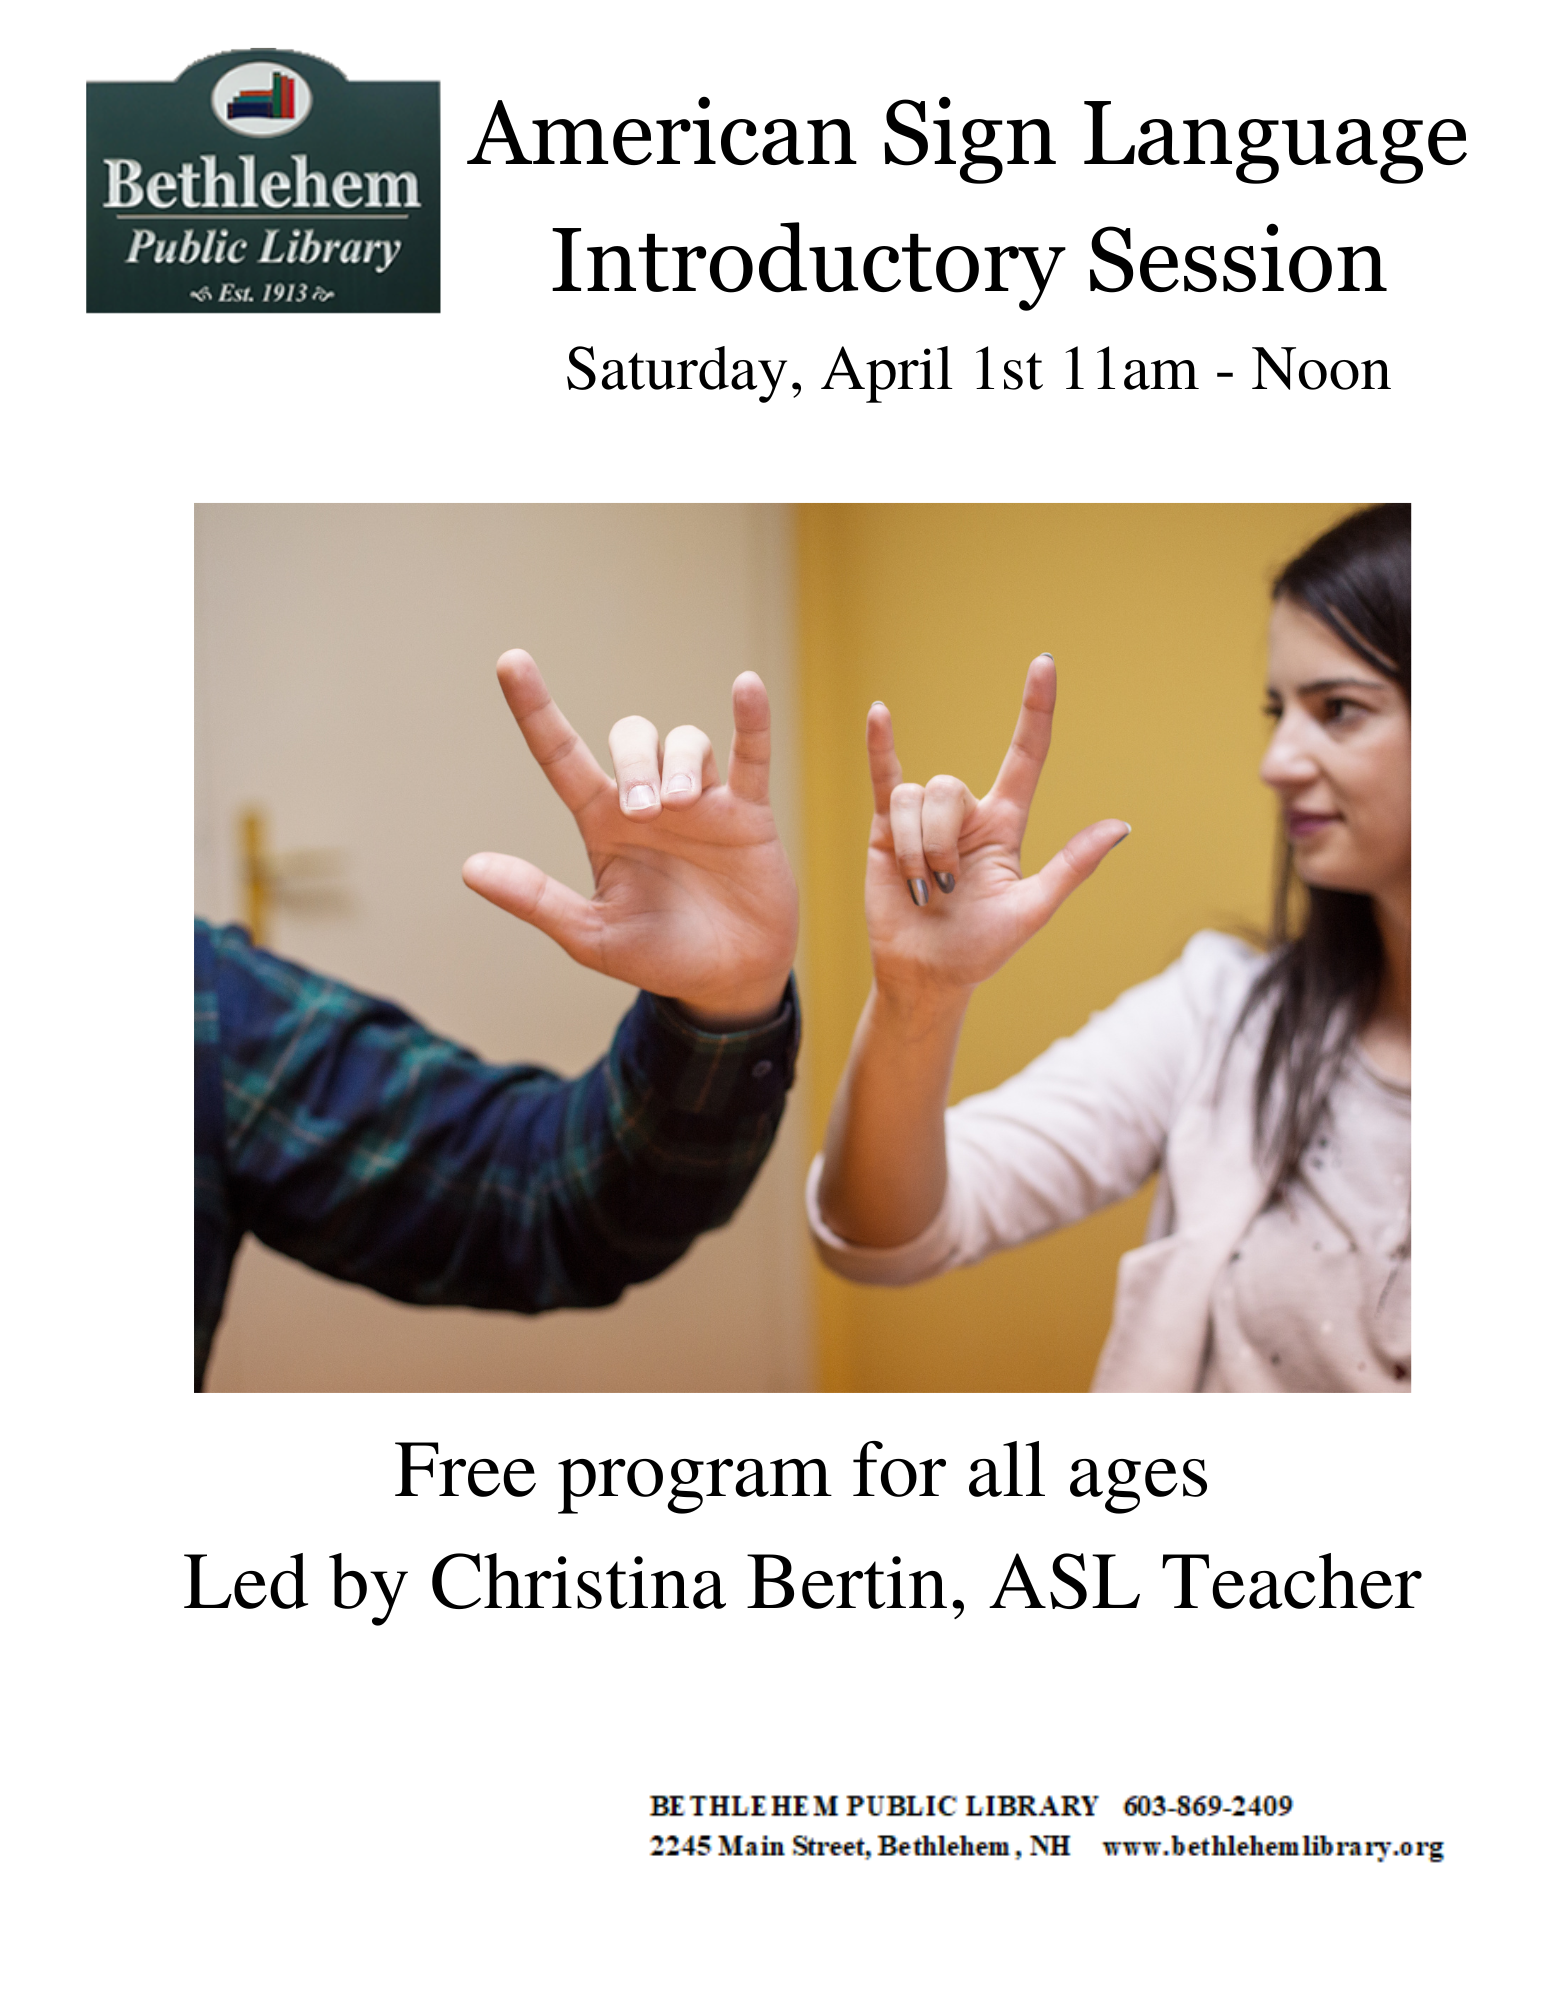 American Sign Language Introductory Session Saturday April 1st 11am Free program for all ages led by Christina Bertin ASL teacher